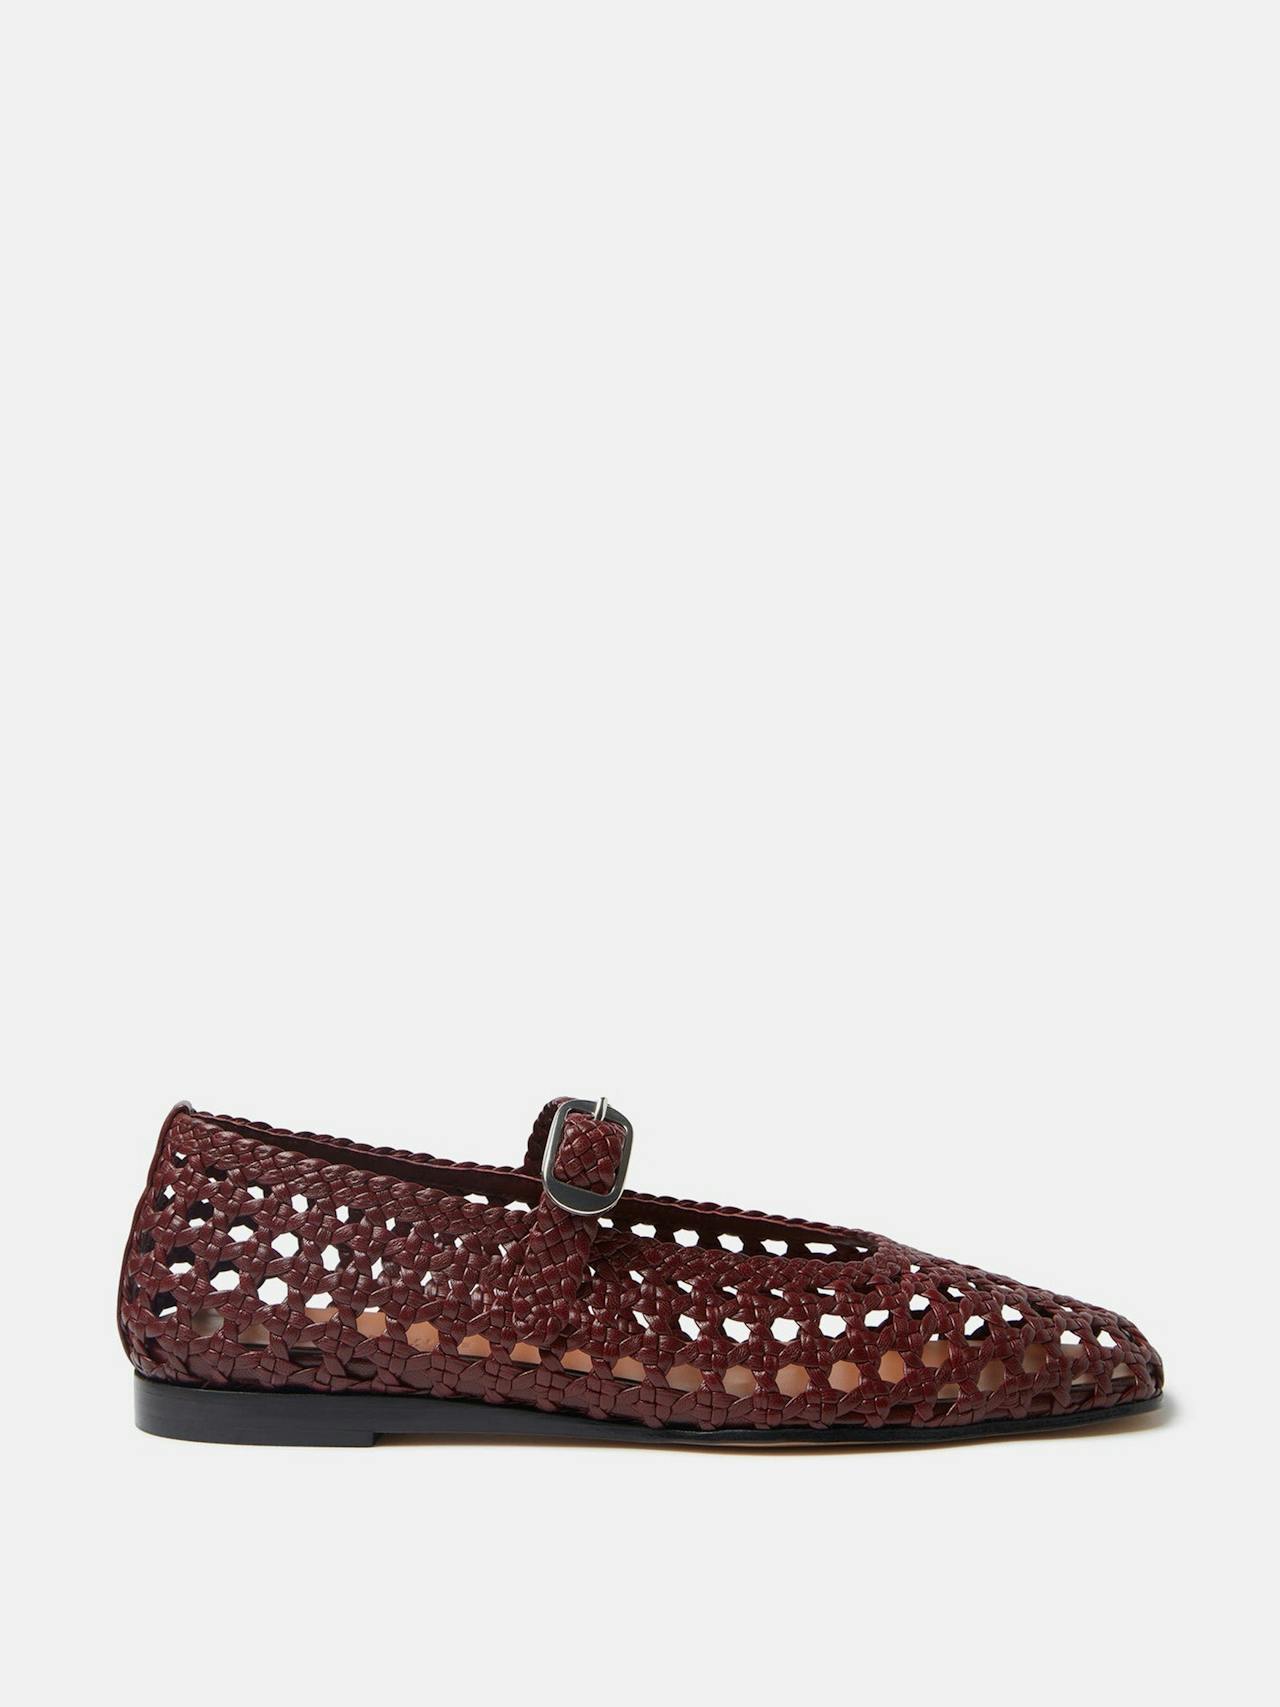 Red leather woven Mary Jane flats